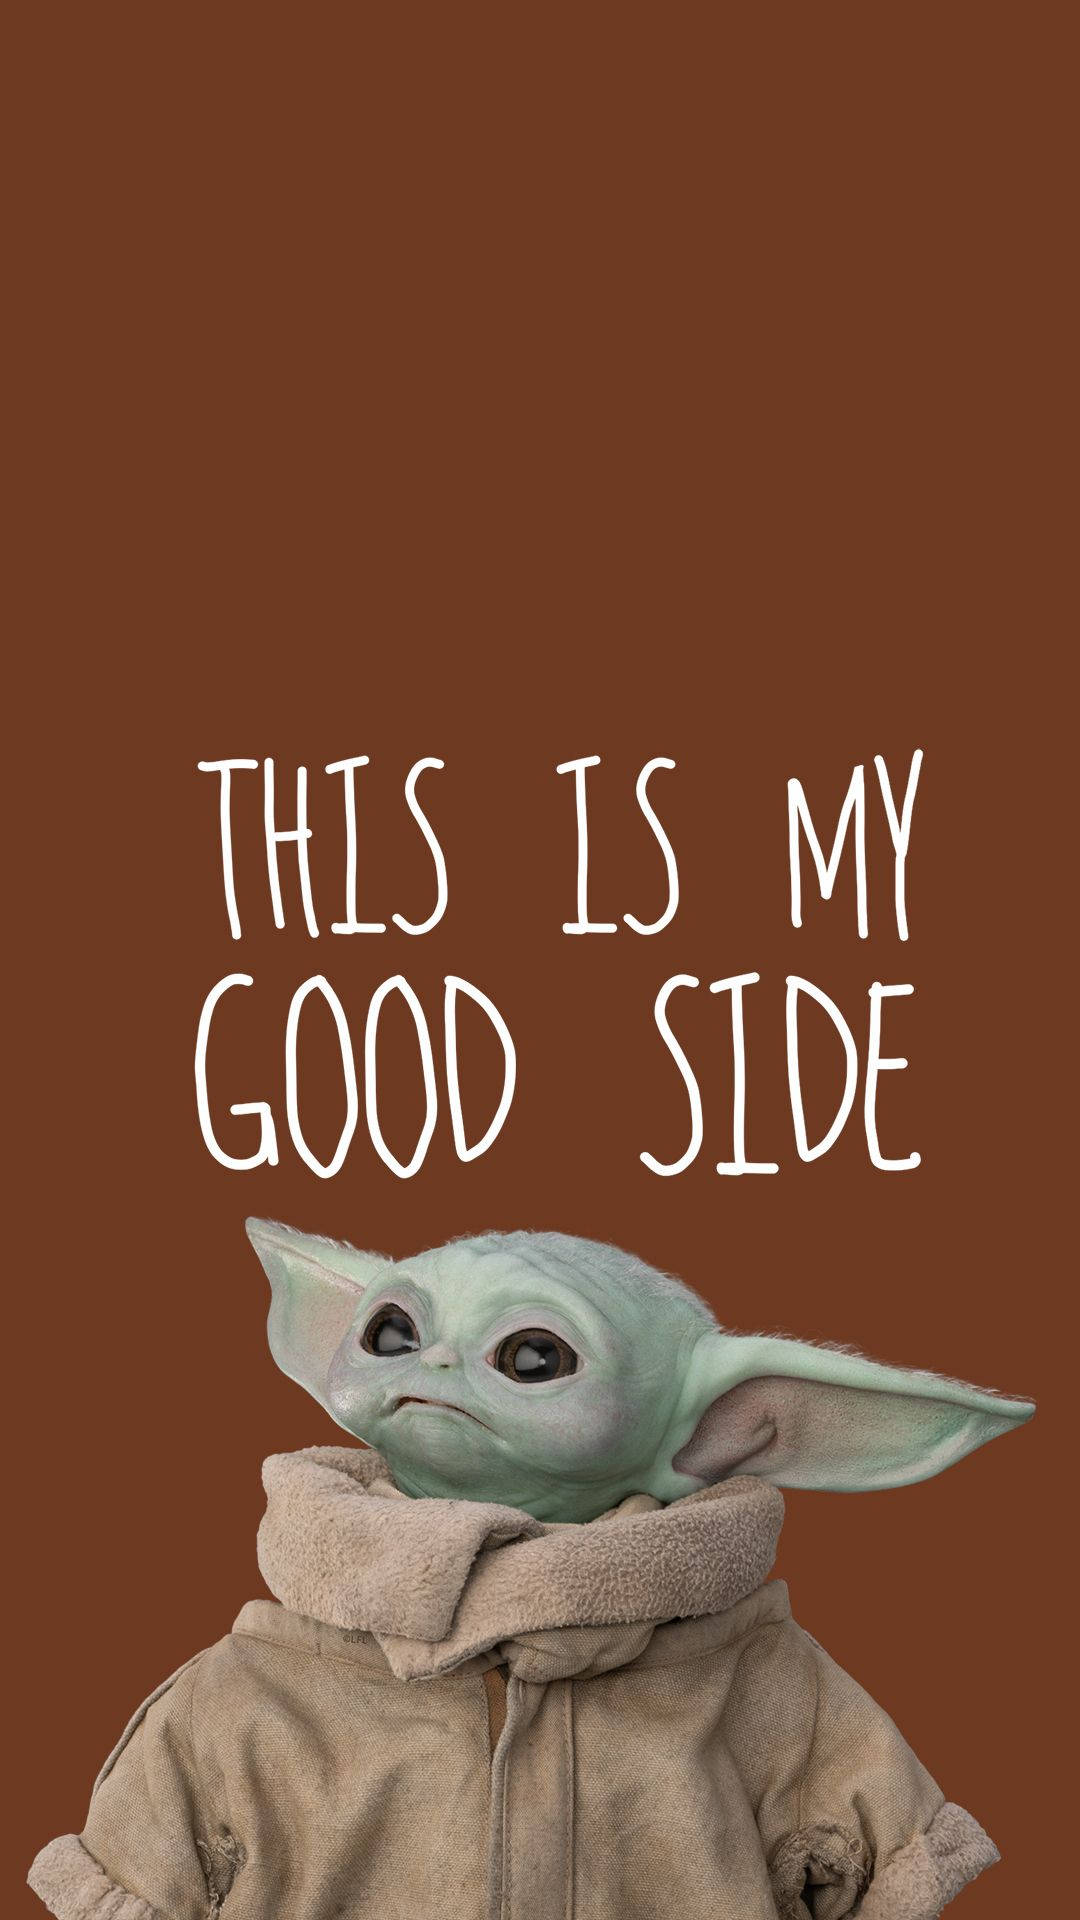 Quote And Baby Yoda Background